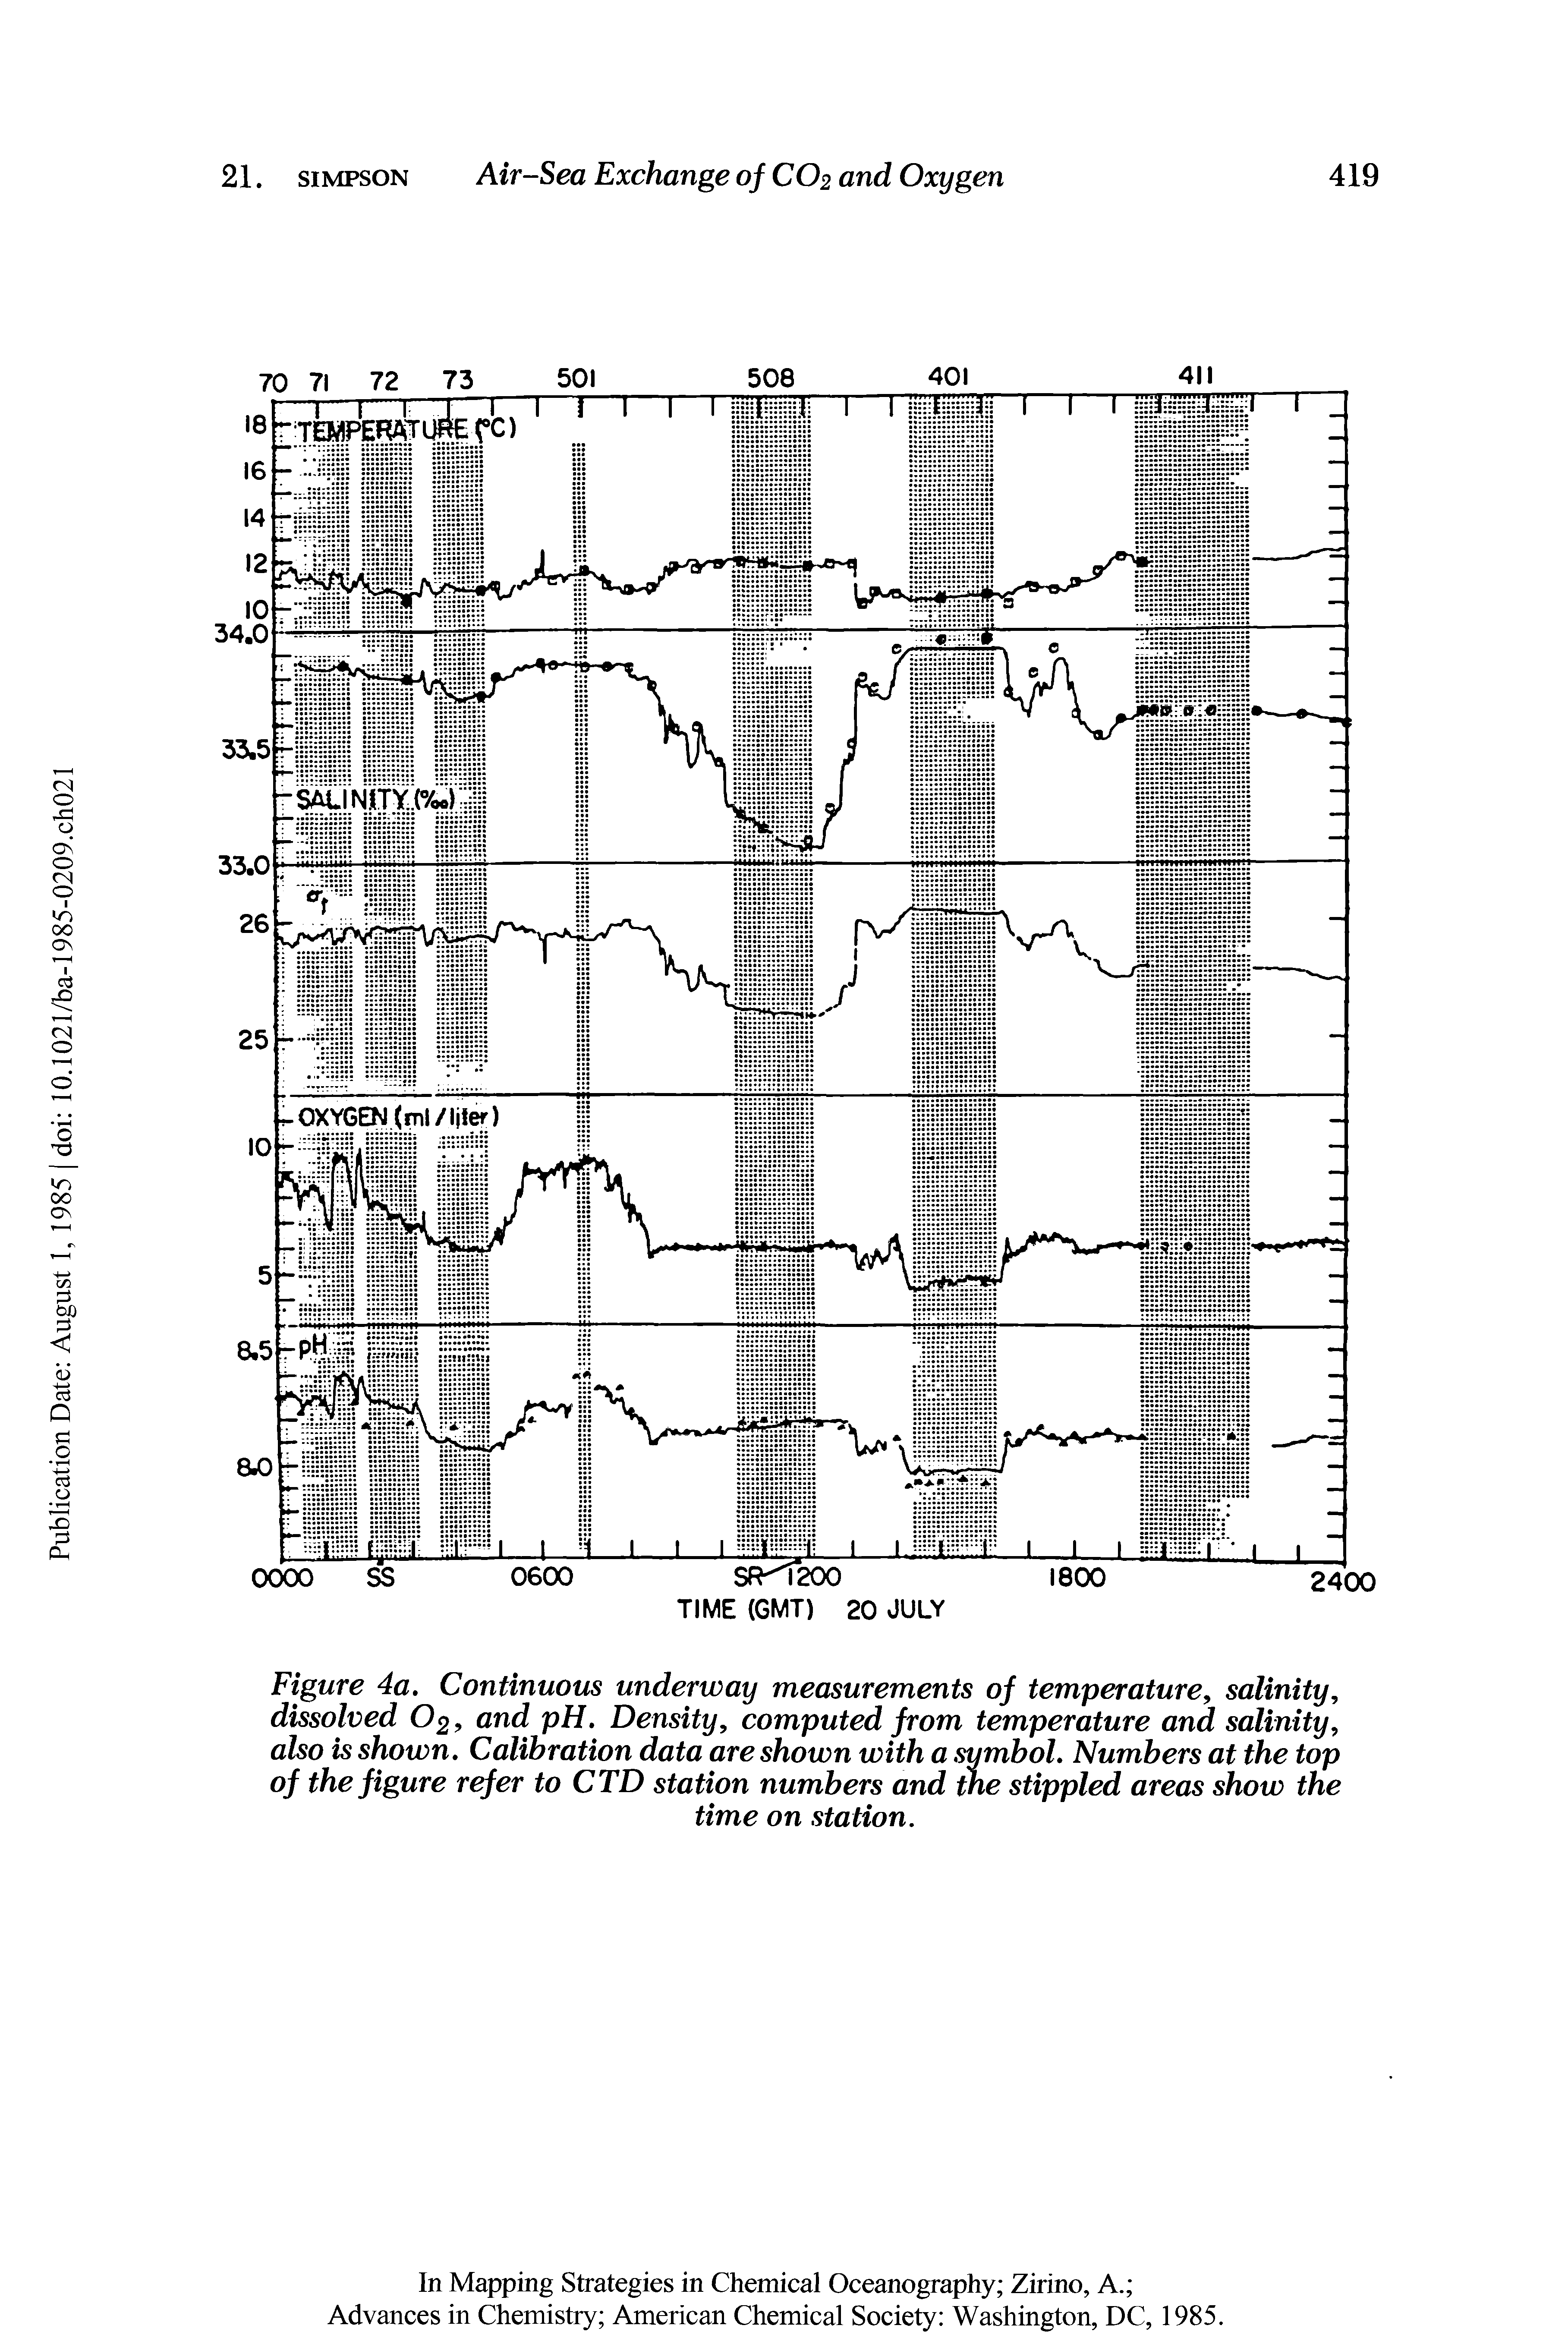 Figure 4a. Continuous underway measurements of temperature salinity, dissolved O2 and pH. Density, computed from temperature and salinity, also is shown. Calibration data are shown with a symbol. Numbers at the top of the figure refer to CTD station numbers and the stippled areas show the...